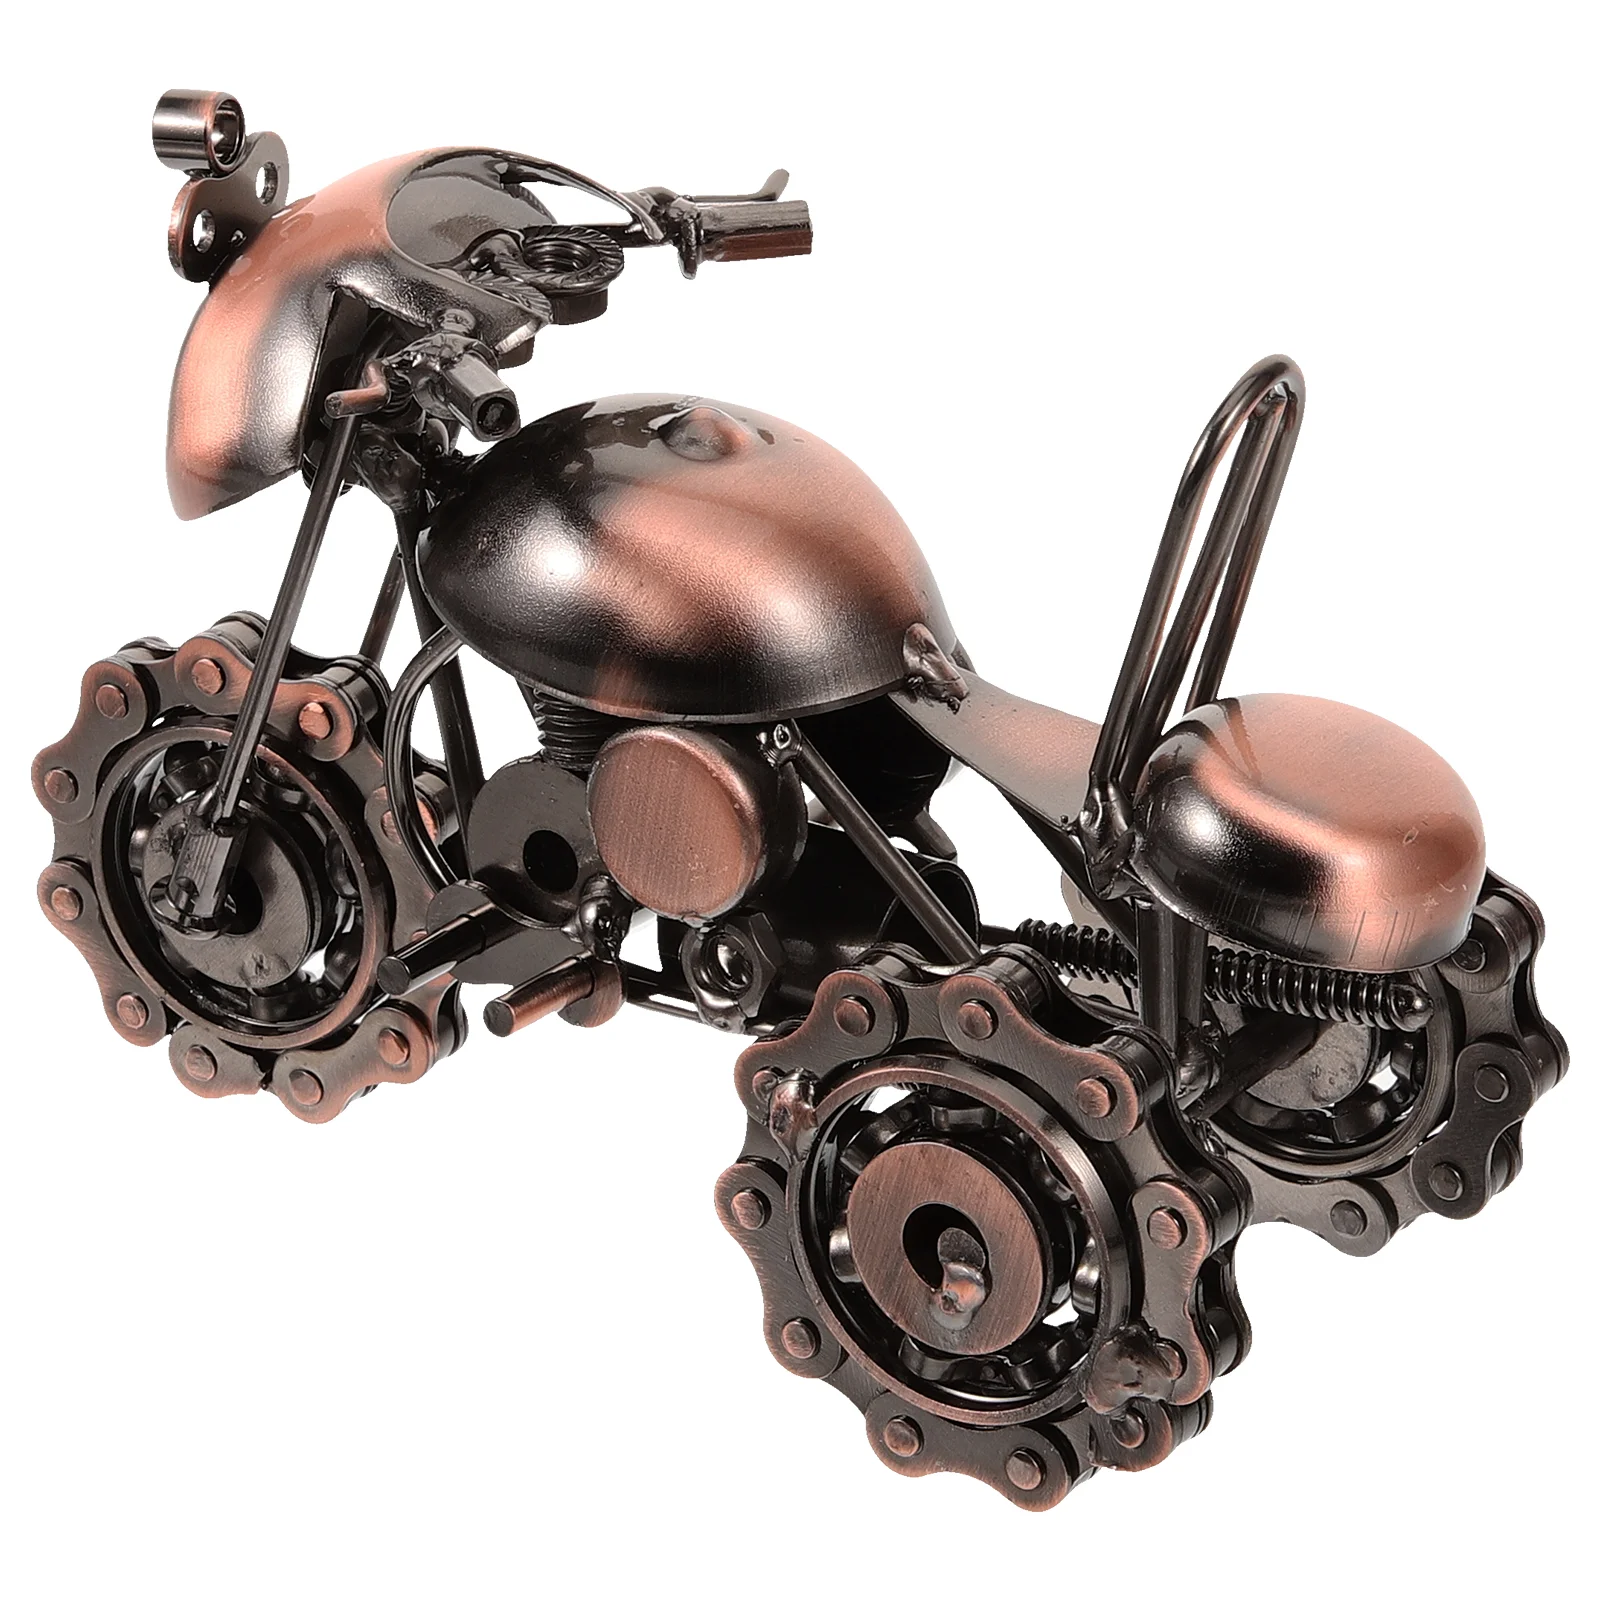 Iron Motorcycle Model Retro Style Metal Motorcycle Decoration Desktop Small Motorcycle Ornament